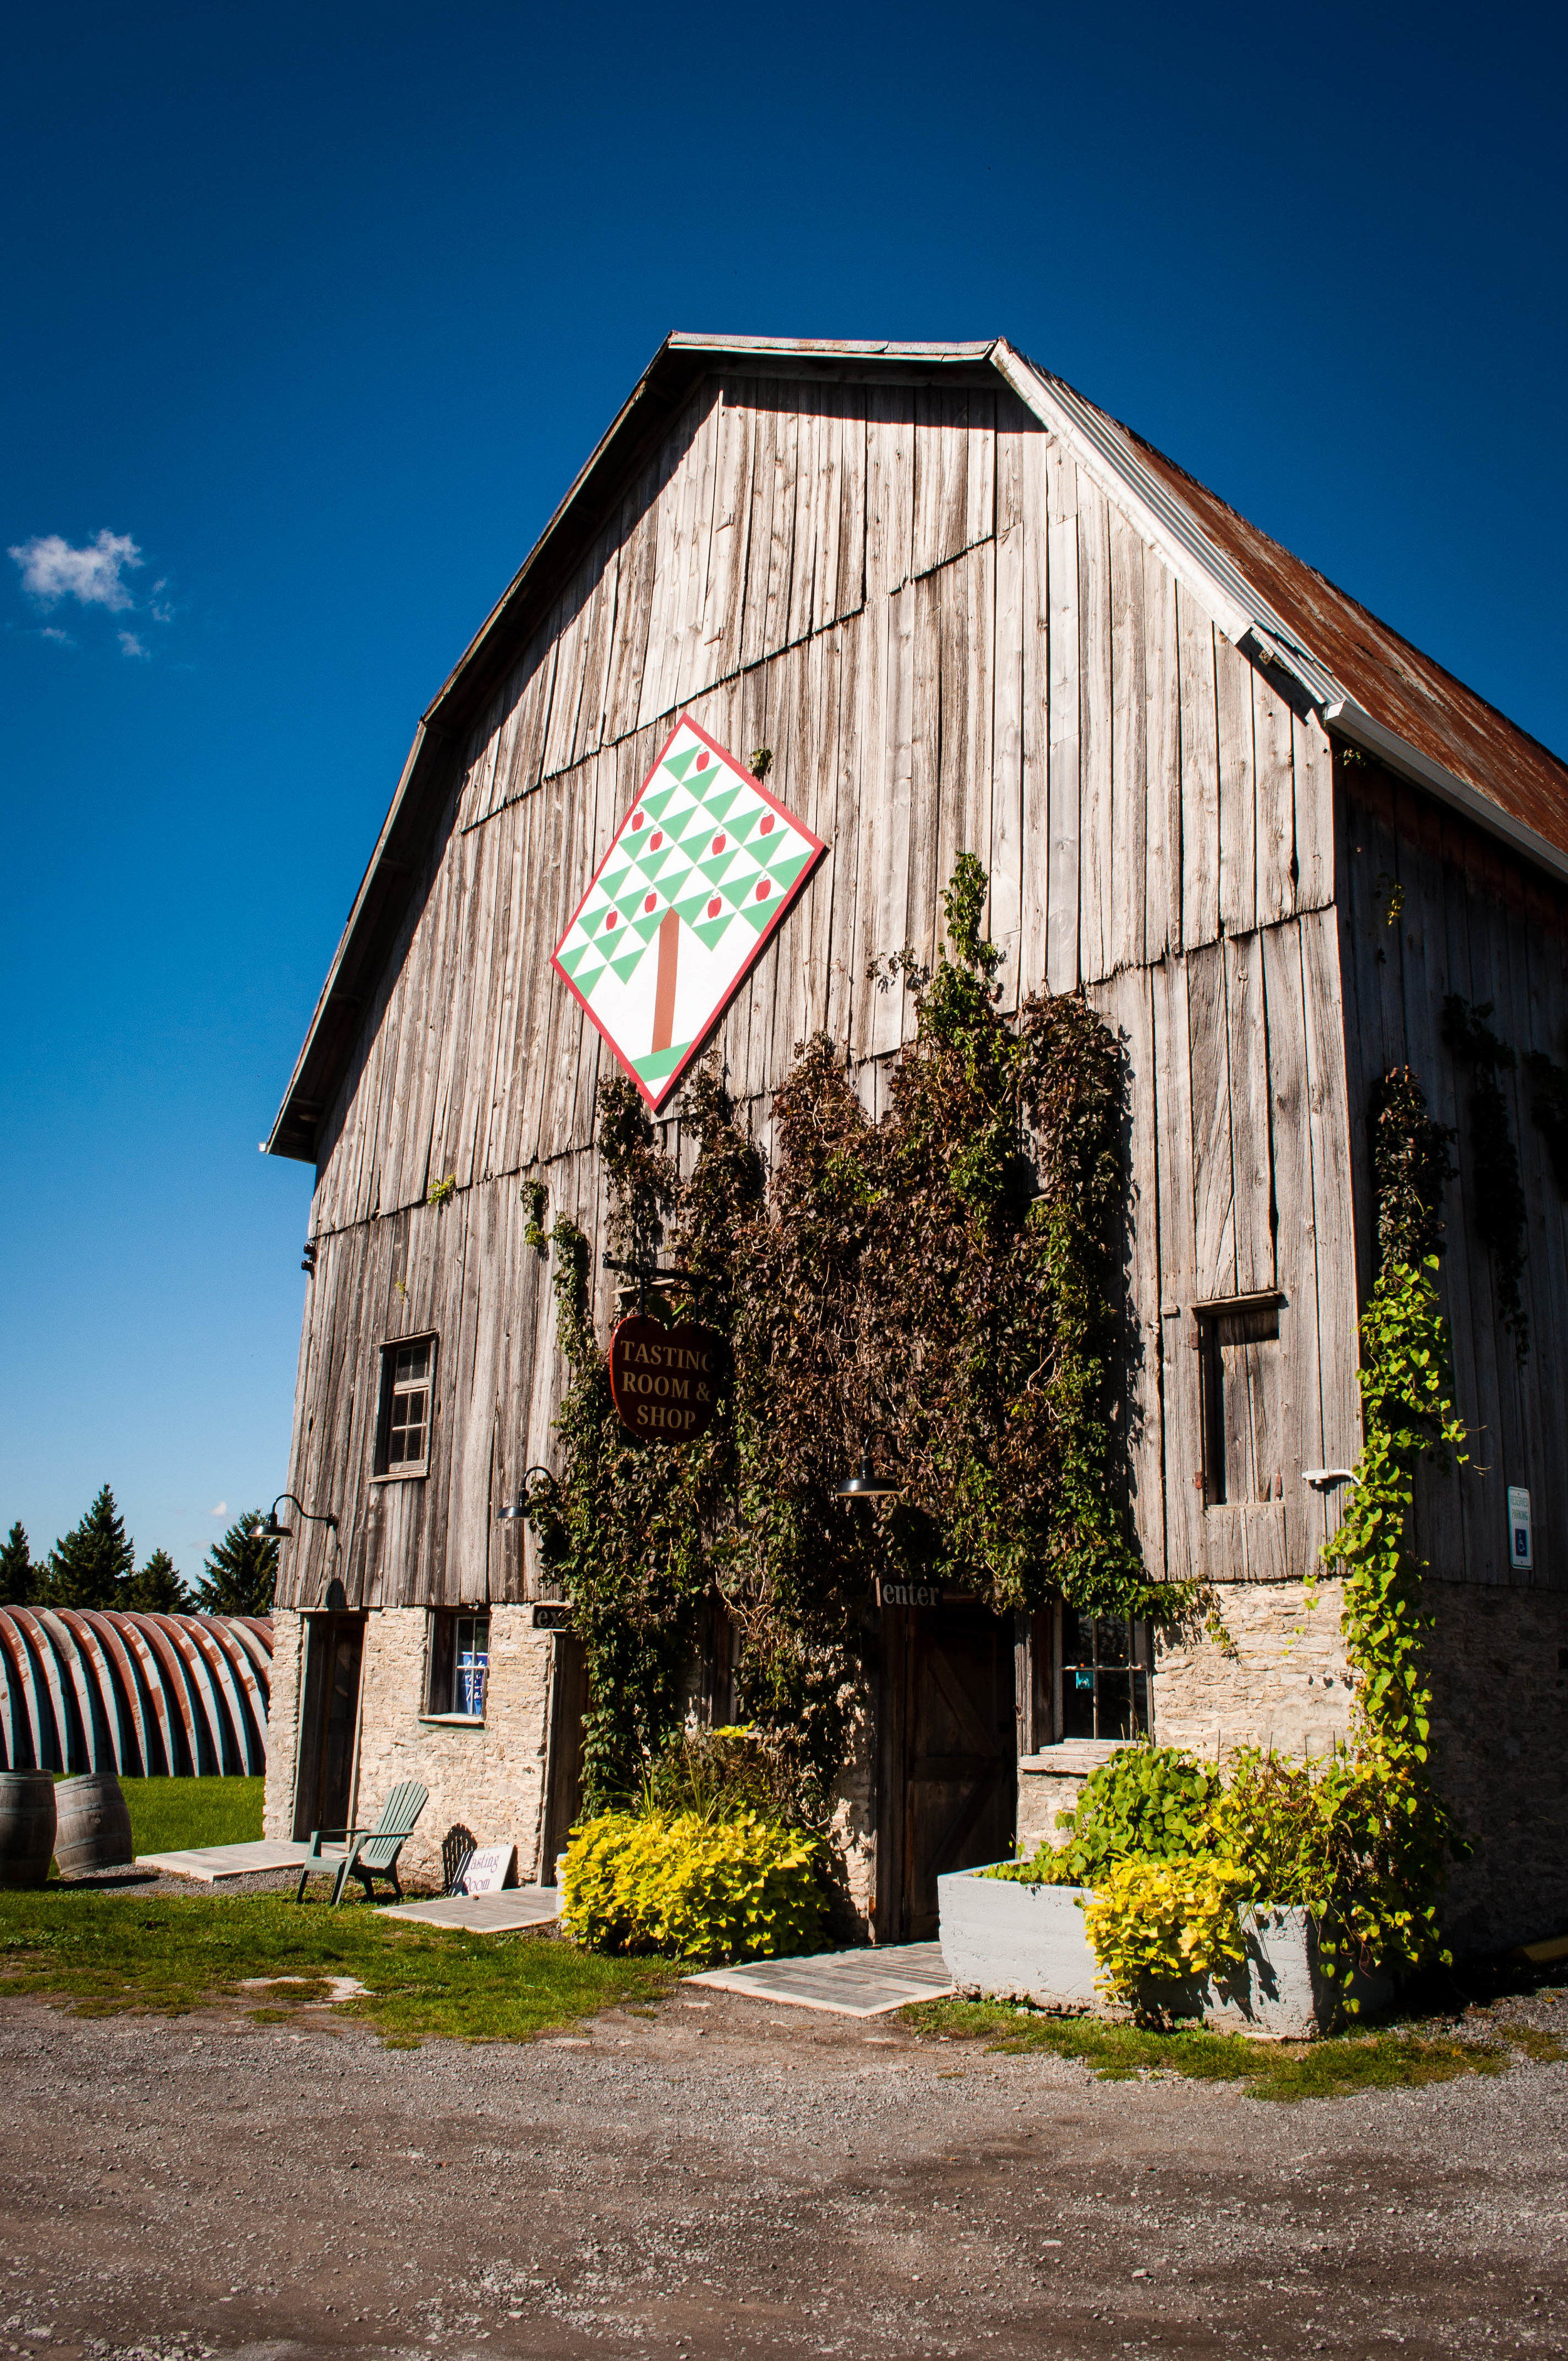 County Cider - Things to do in Prince Edward County